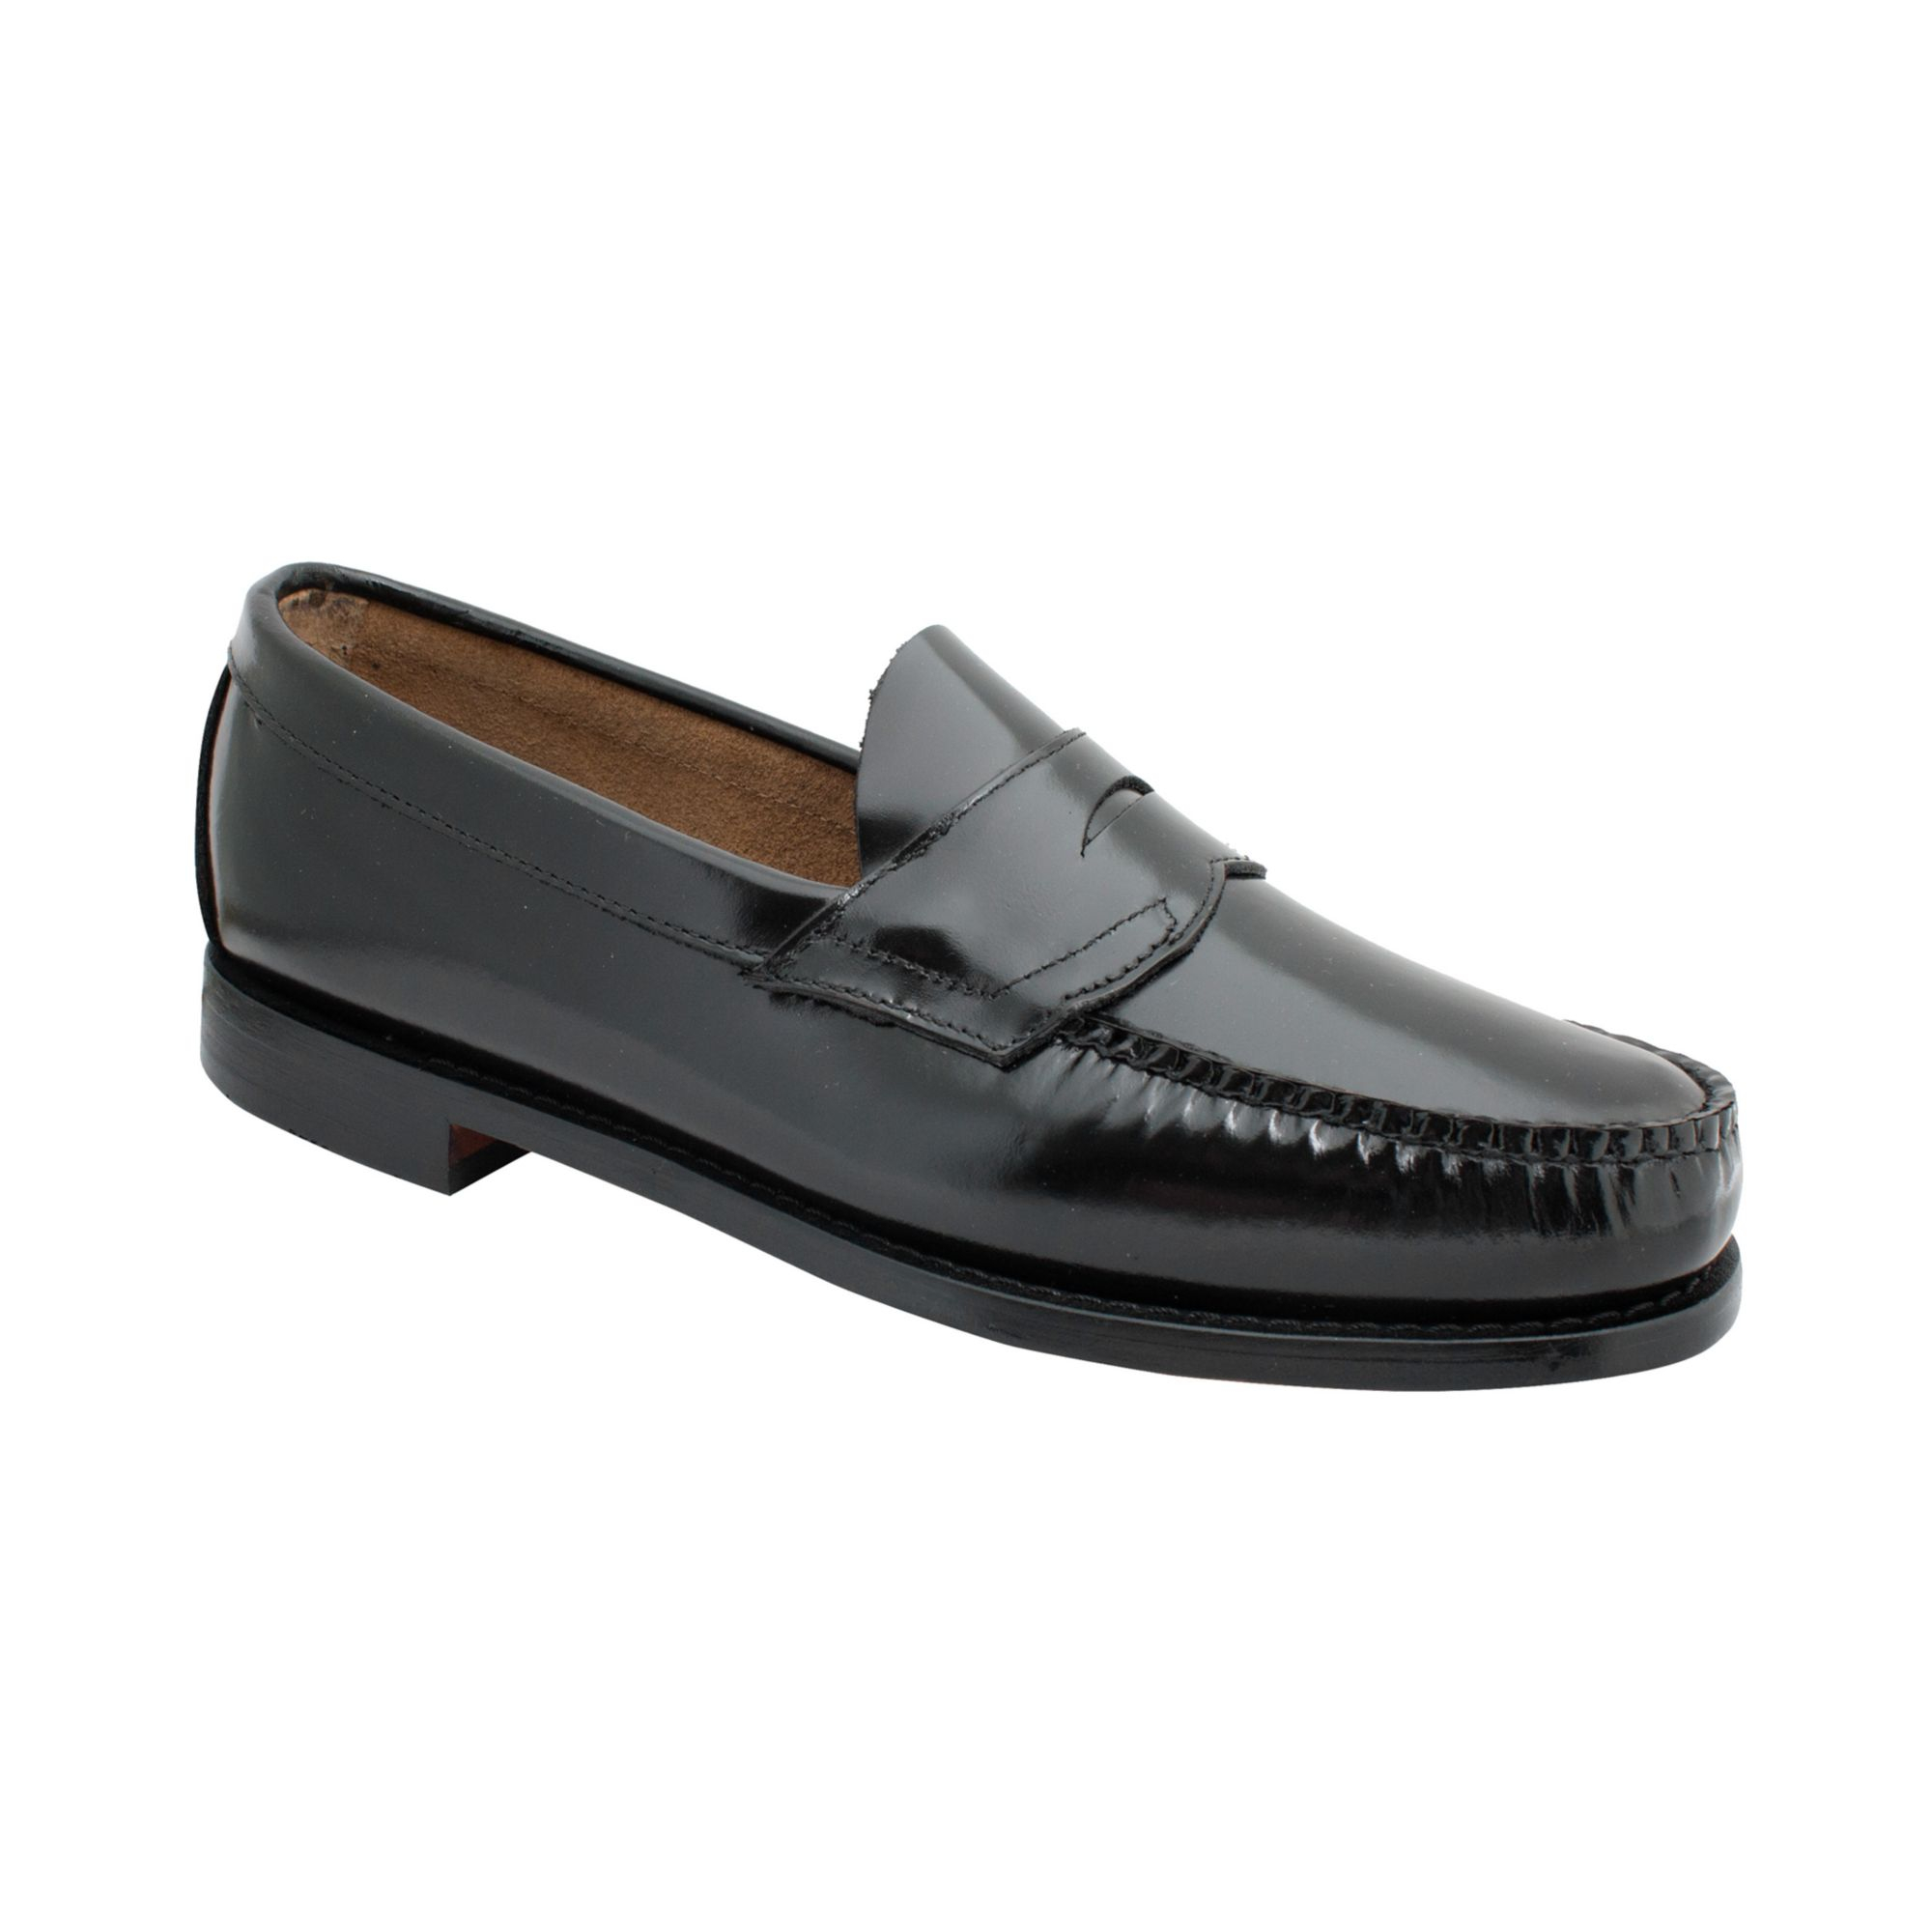 G.h. Bass & Co. Bass Logan Weejuns Flat Strap Penny Loafers in Black ...